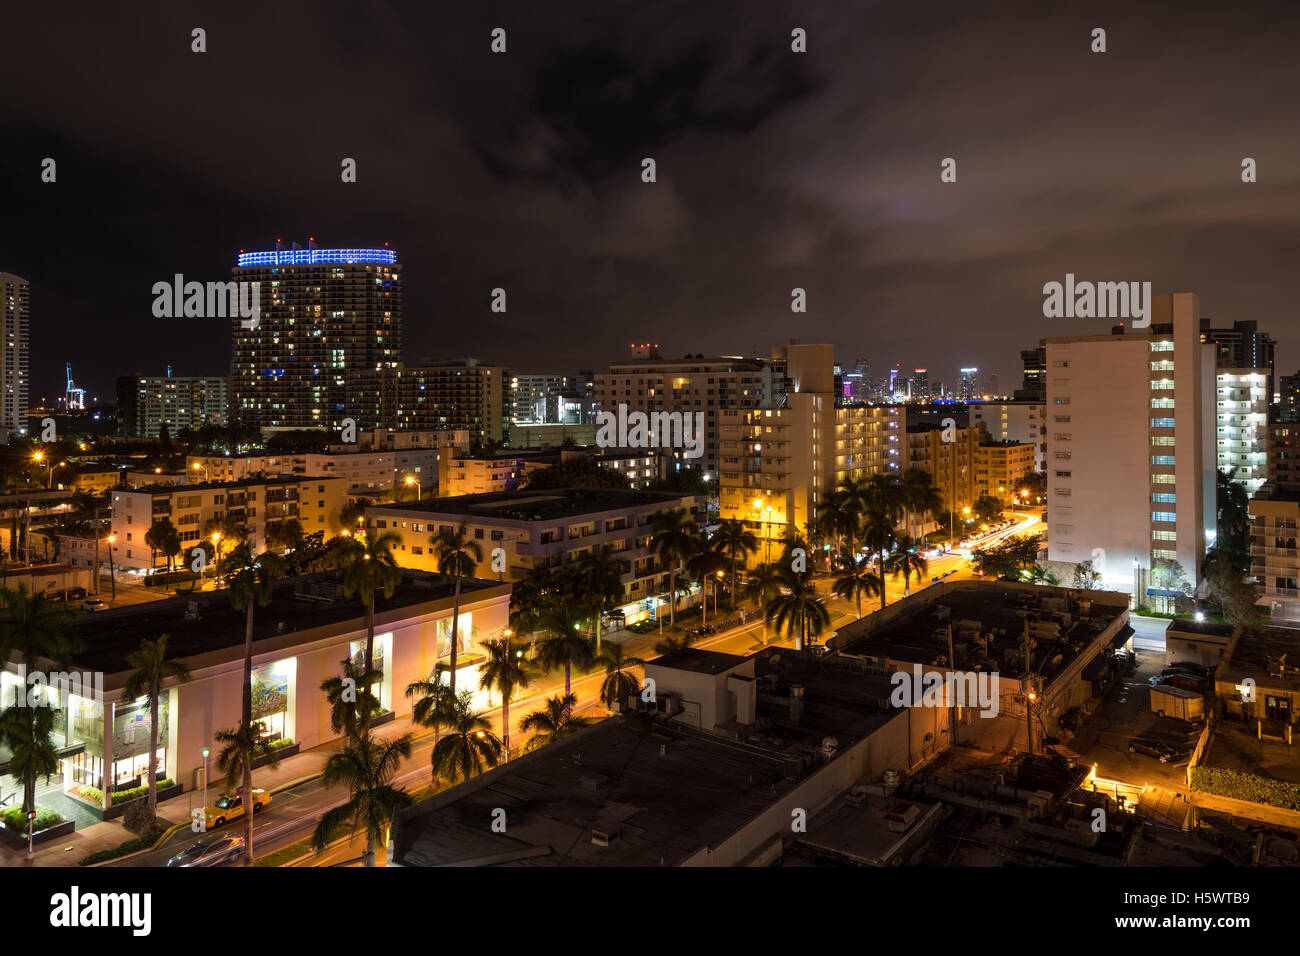 Long exposition night shot of Miami Beach, Florida, with Downtown Miami skyscrapers in the distance. Stock Photo